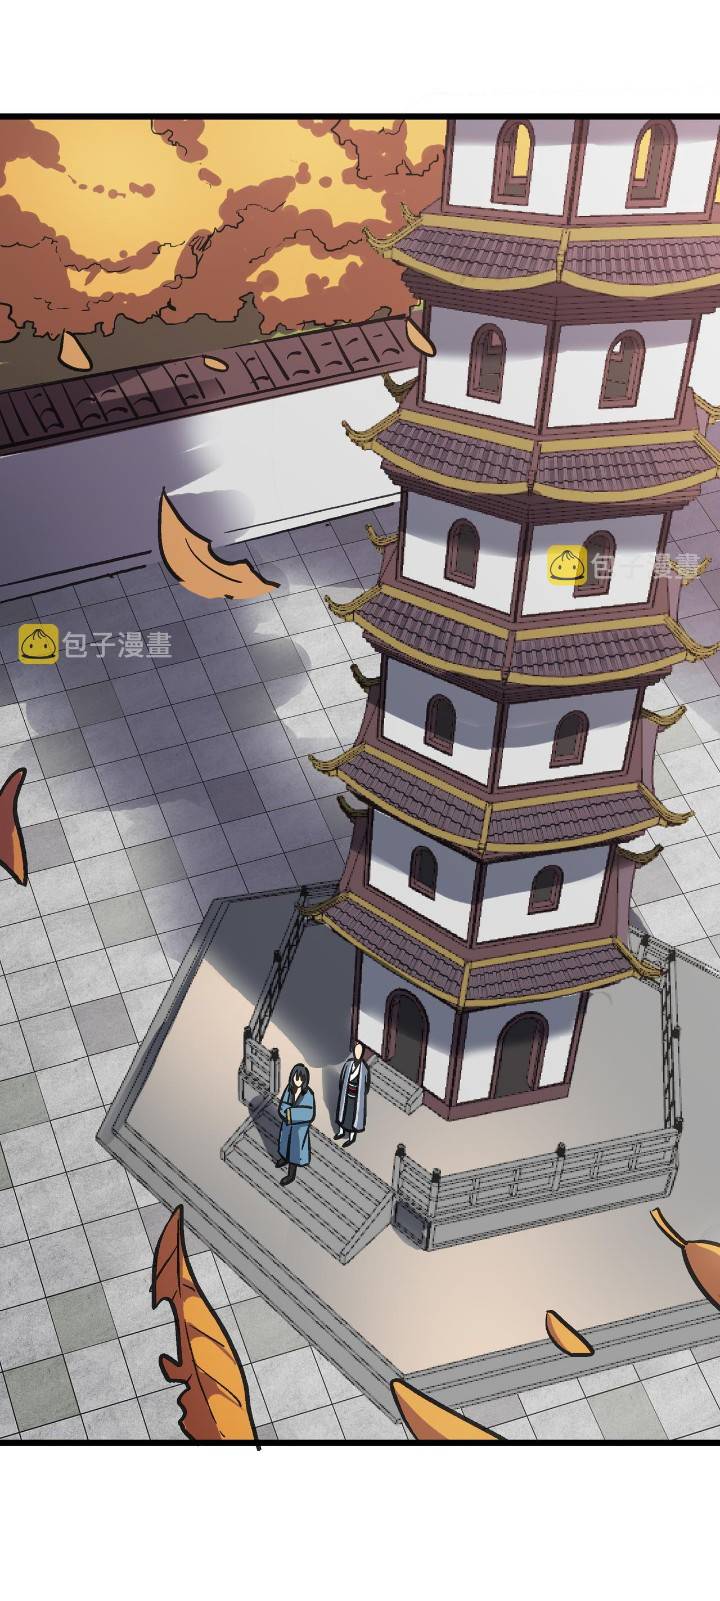 Dilarang COPAS - situs resmi www.mangacanblog.com - Komik building the strongest shaolin temple in another world 055 - chapter 55 56 Indonesia building the strongest shaolin temple in another world 055 - chapter 55 Terbaru 36|Baca Manga Komik Indonesia|Mangacan